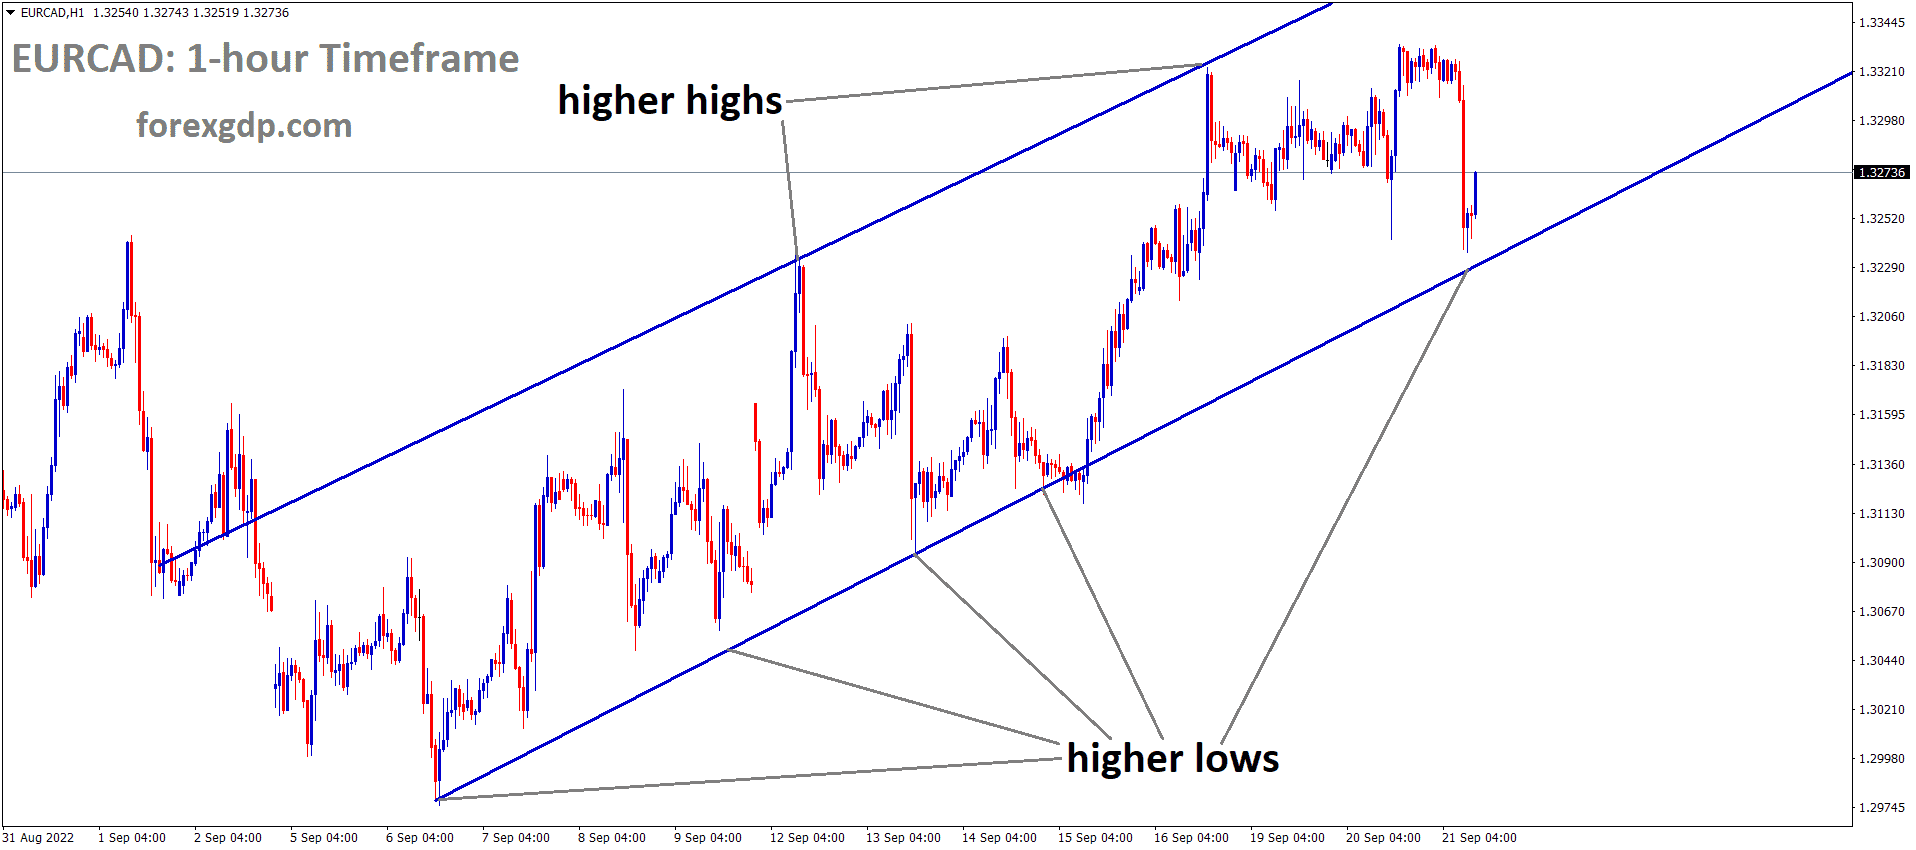 EURCAD is moving in an Ascending channel and the market has rebounded from the higher low area of the channel